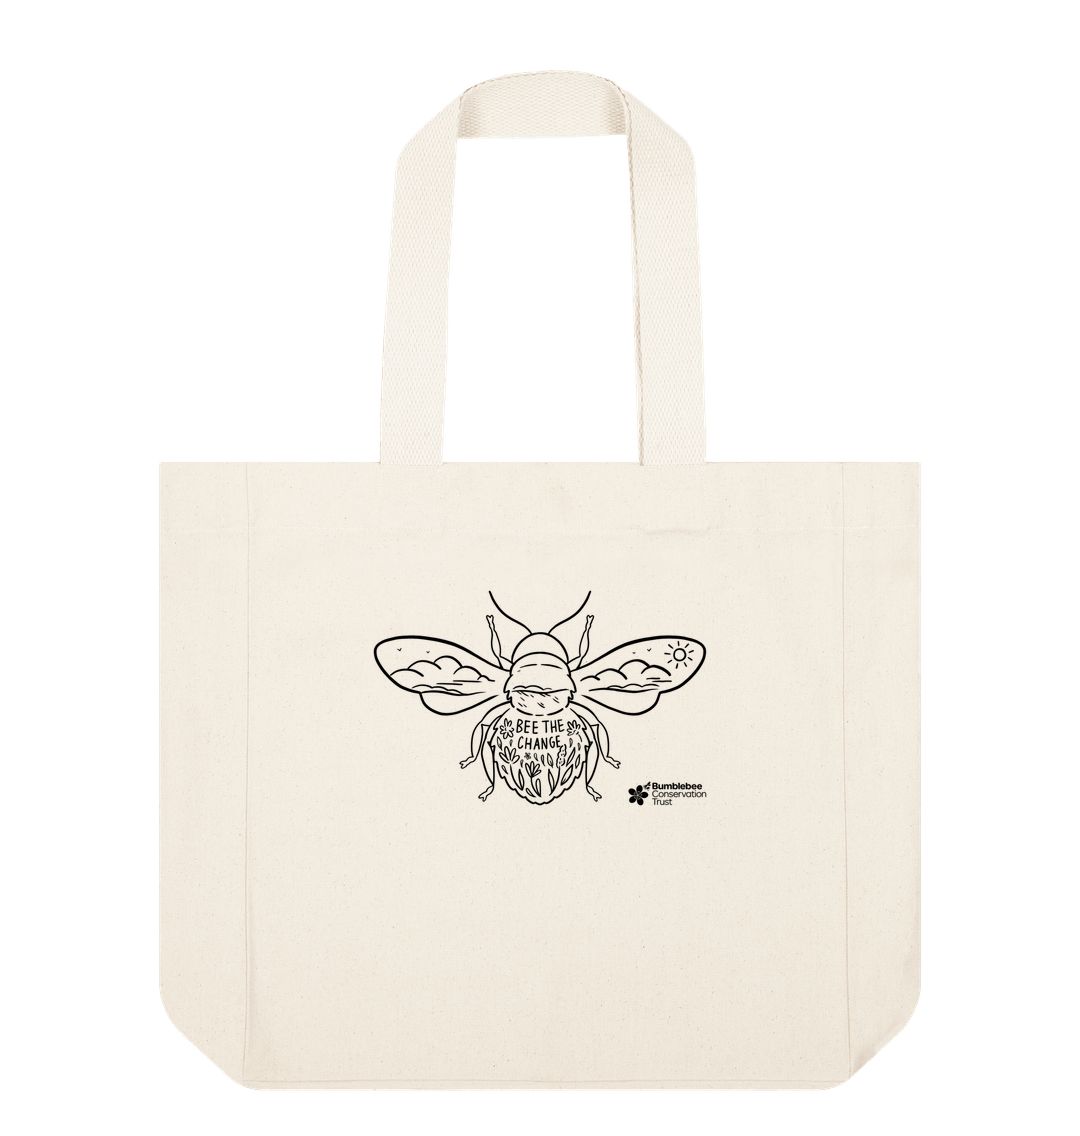 Bumble Bee School Bag – Etched in Stone and Artistry